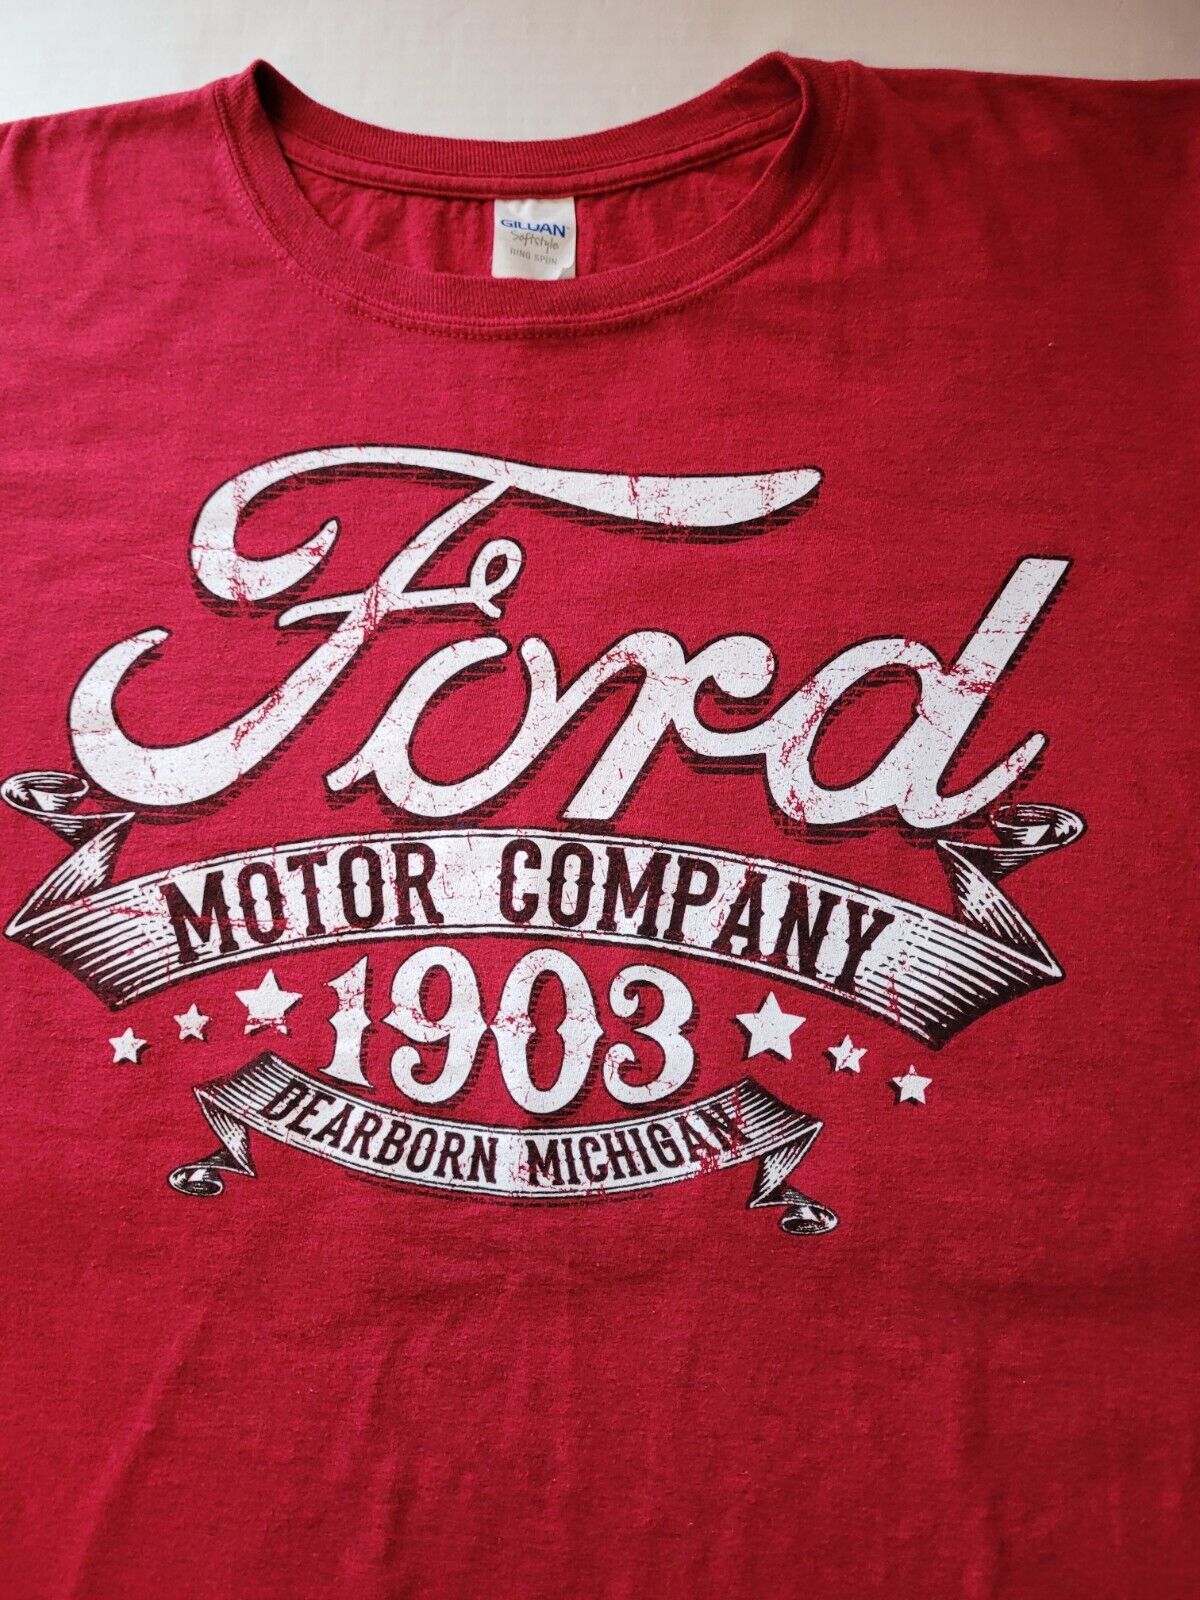 Gildan soft style T-shirt red large Ford motor co… - image 2